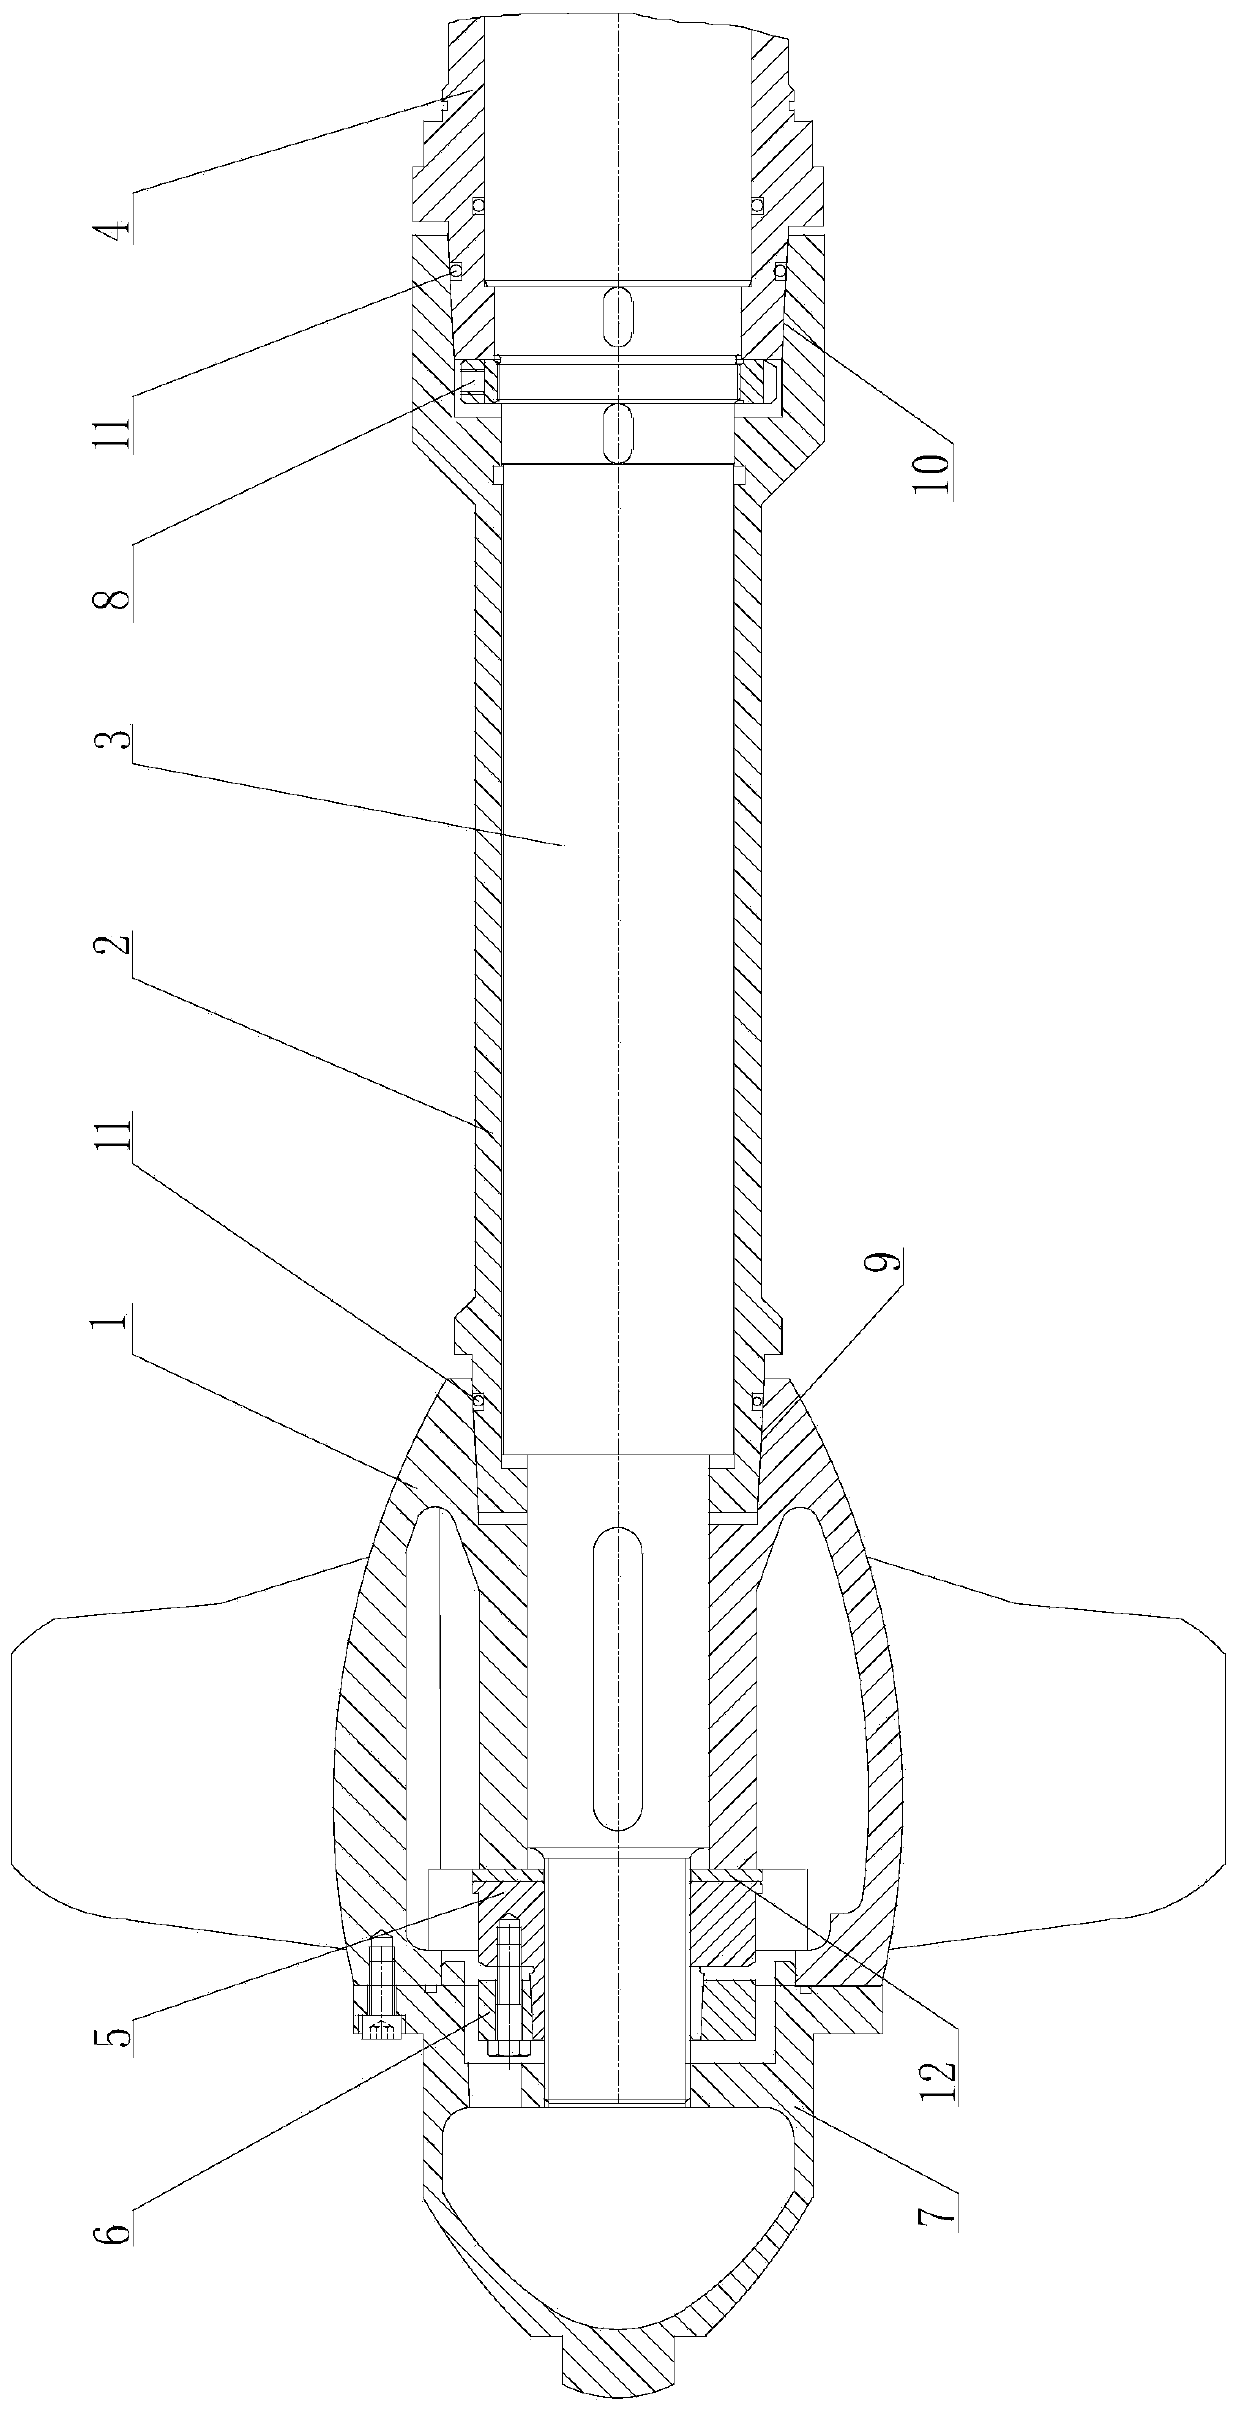 Structure for improving rigidity of rotor